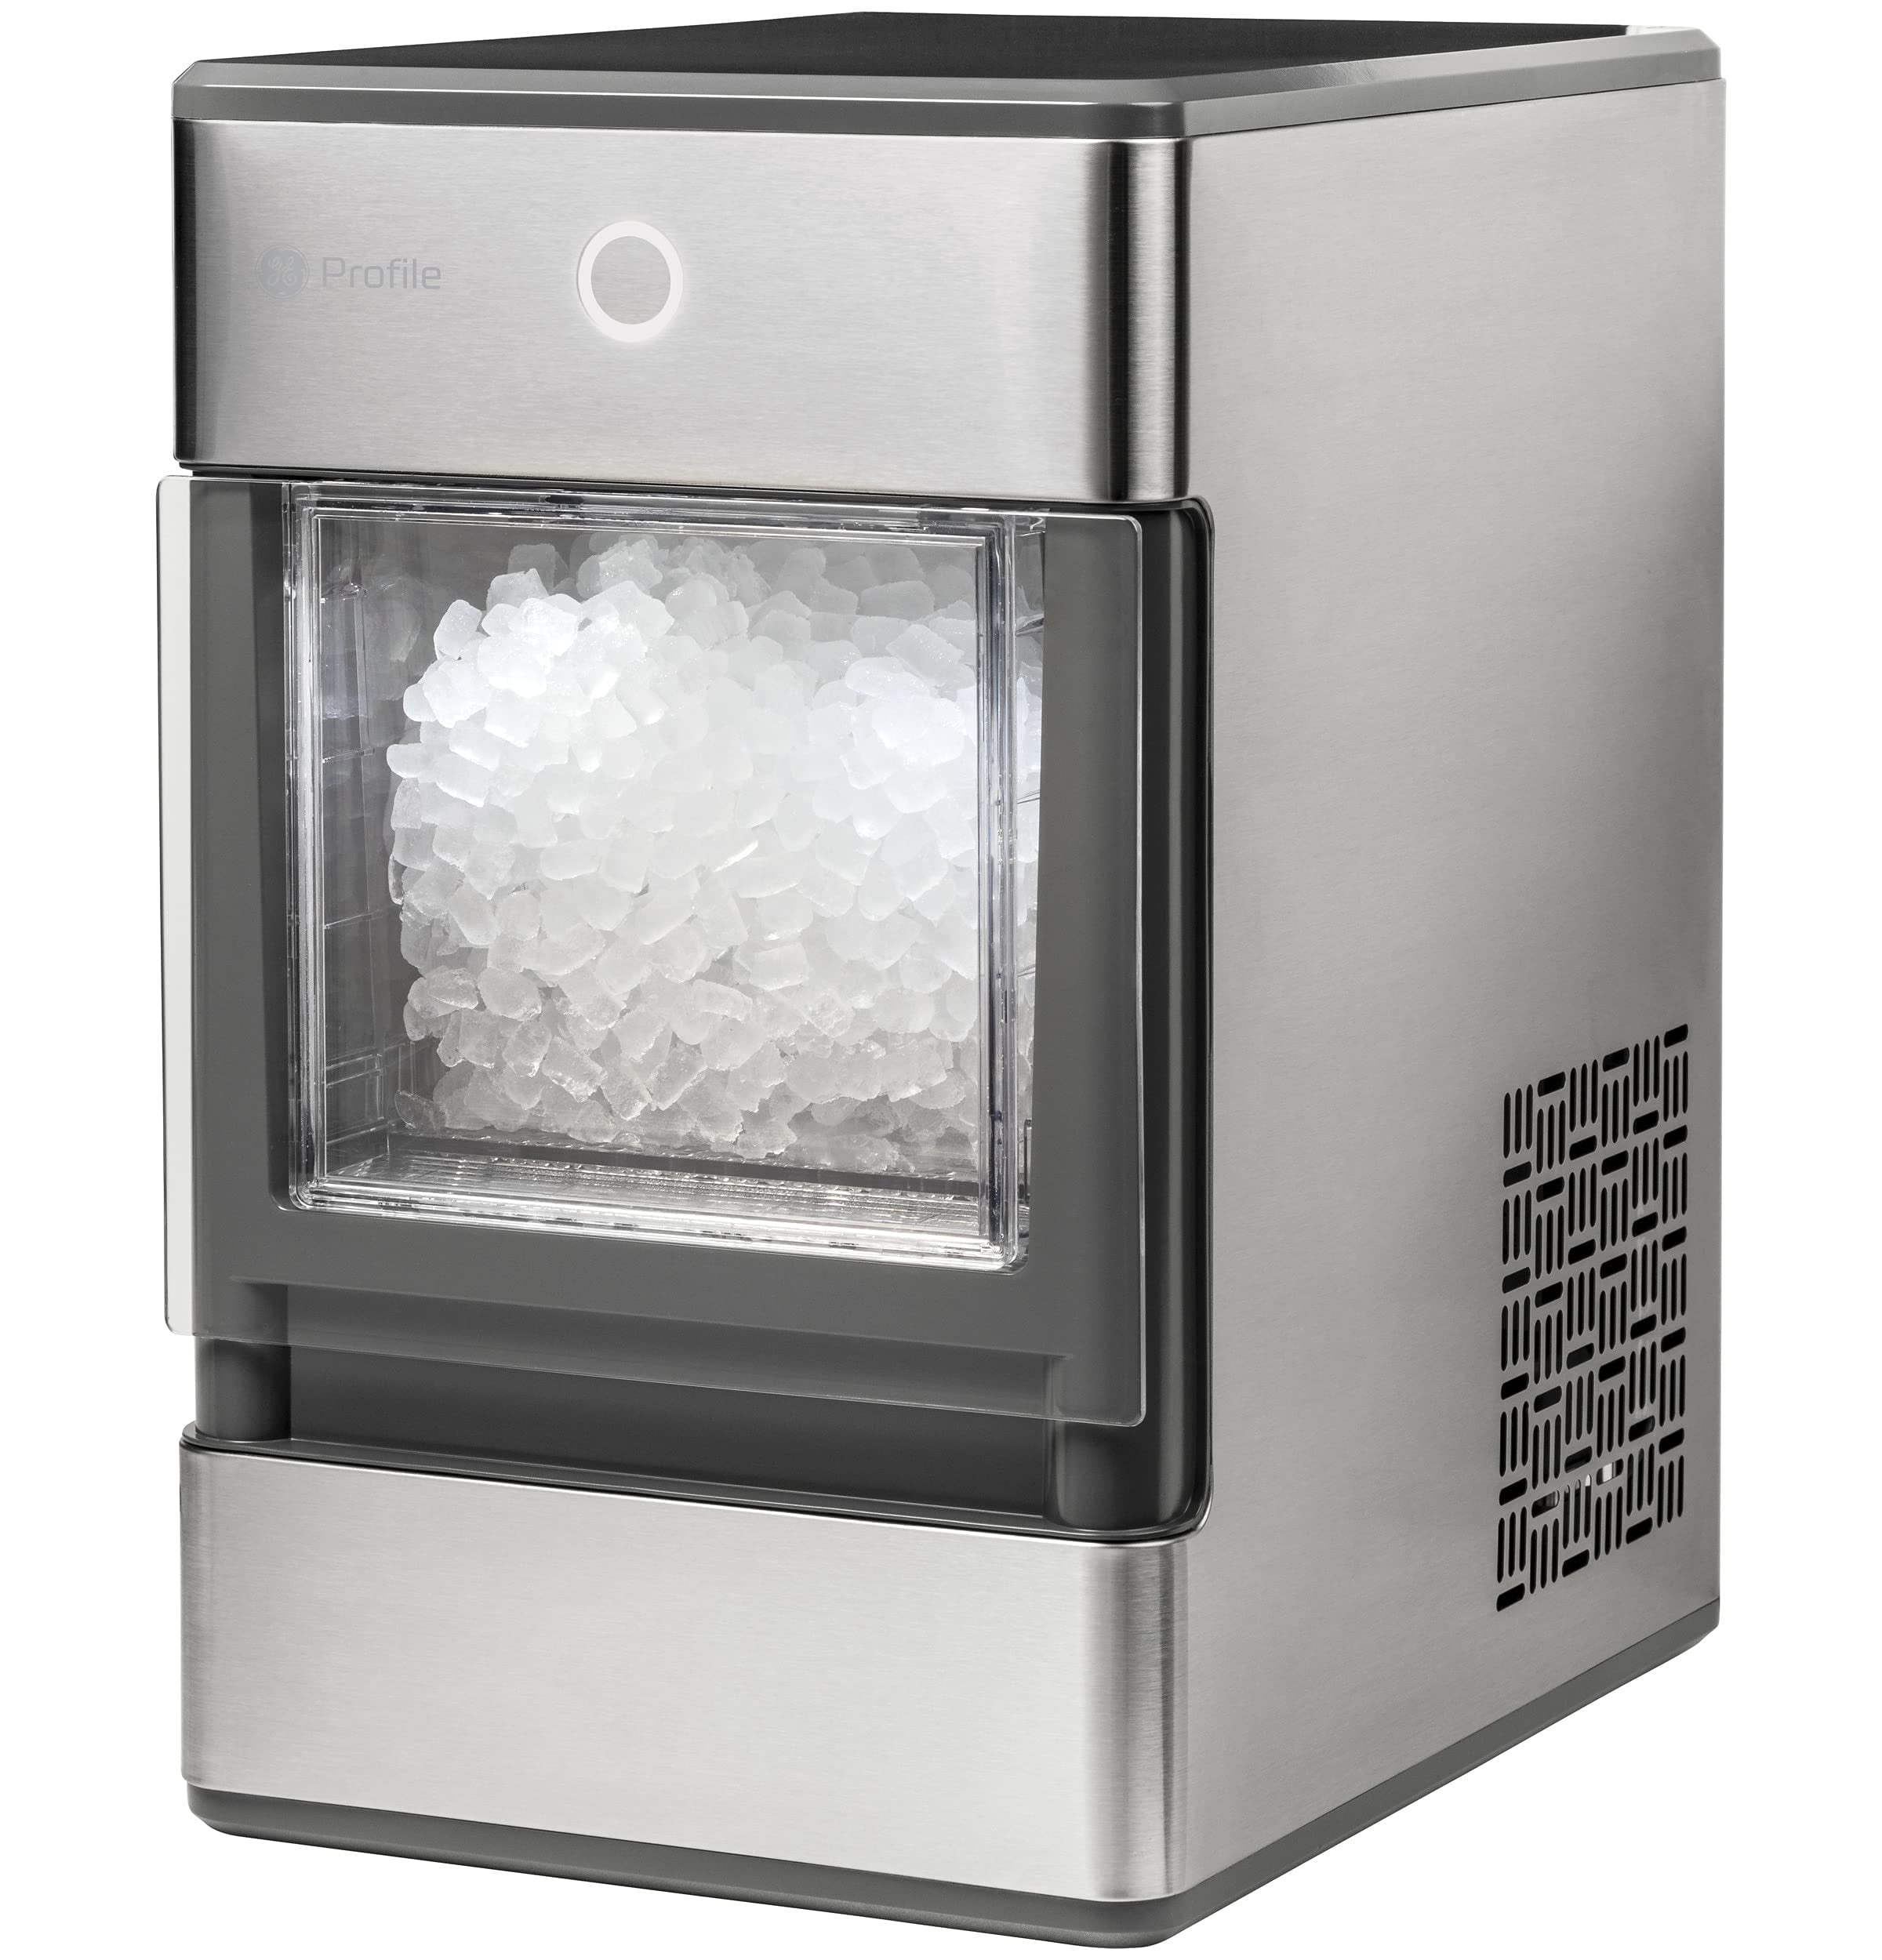 GE Profile Opal, Countertop Nugget Ice Maker, Portable Ice Machine Makes  up to 24 lbs. of Ice Per Day, Stainless Steel Finish